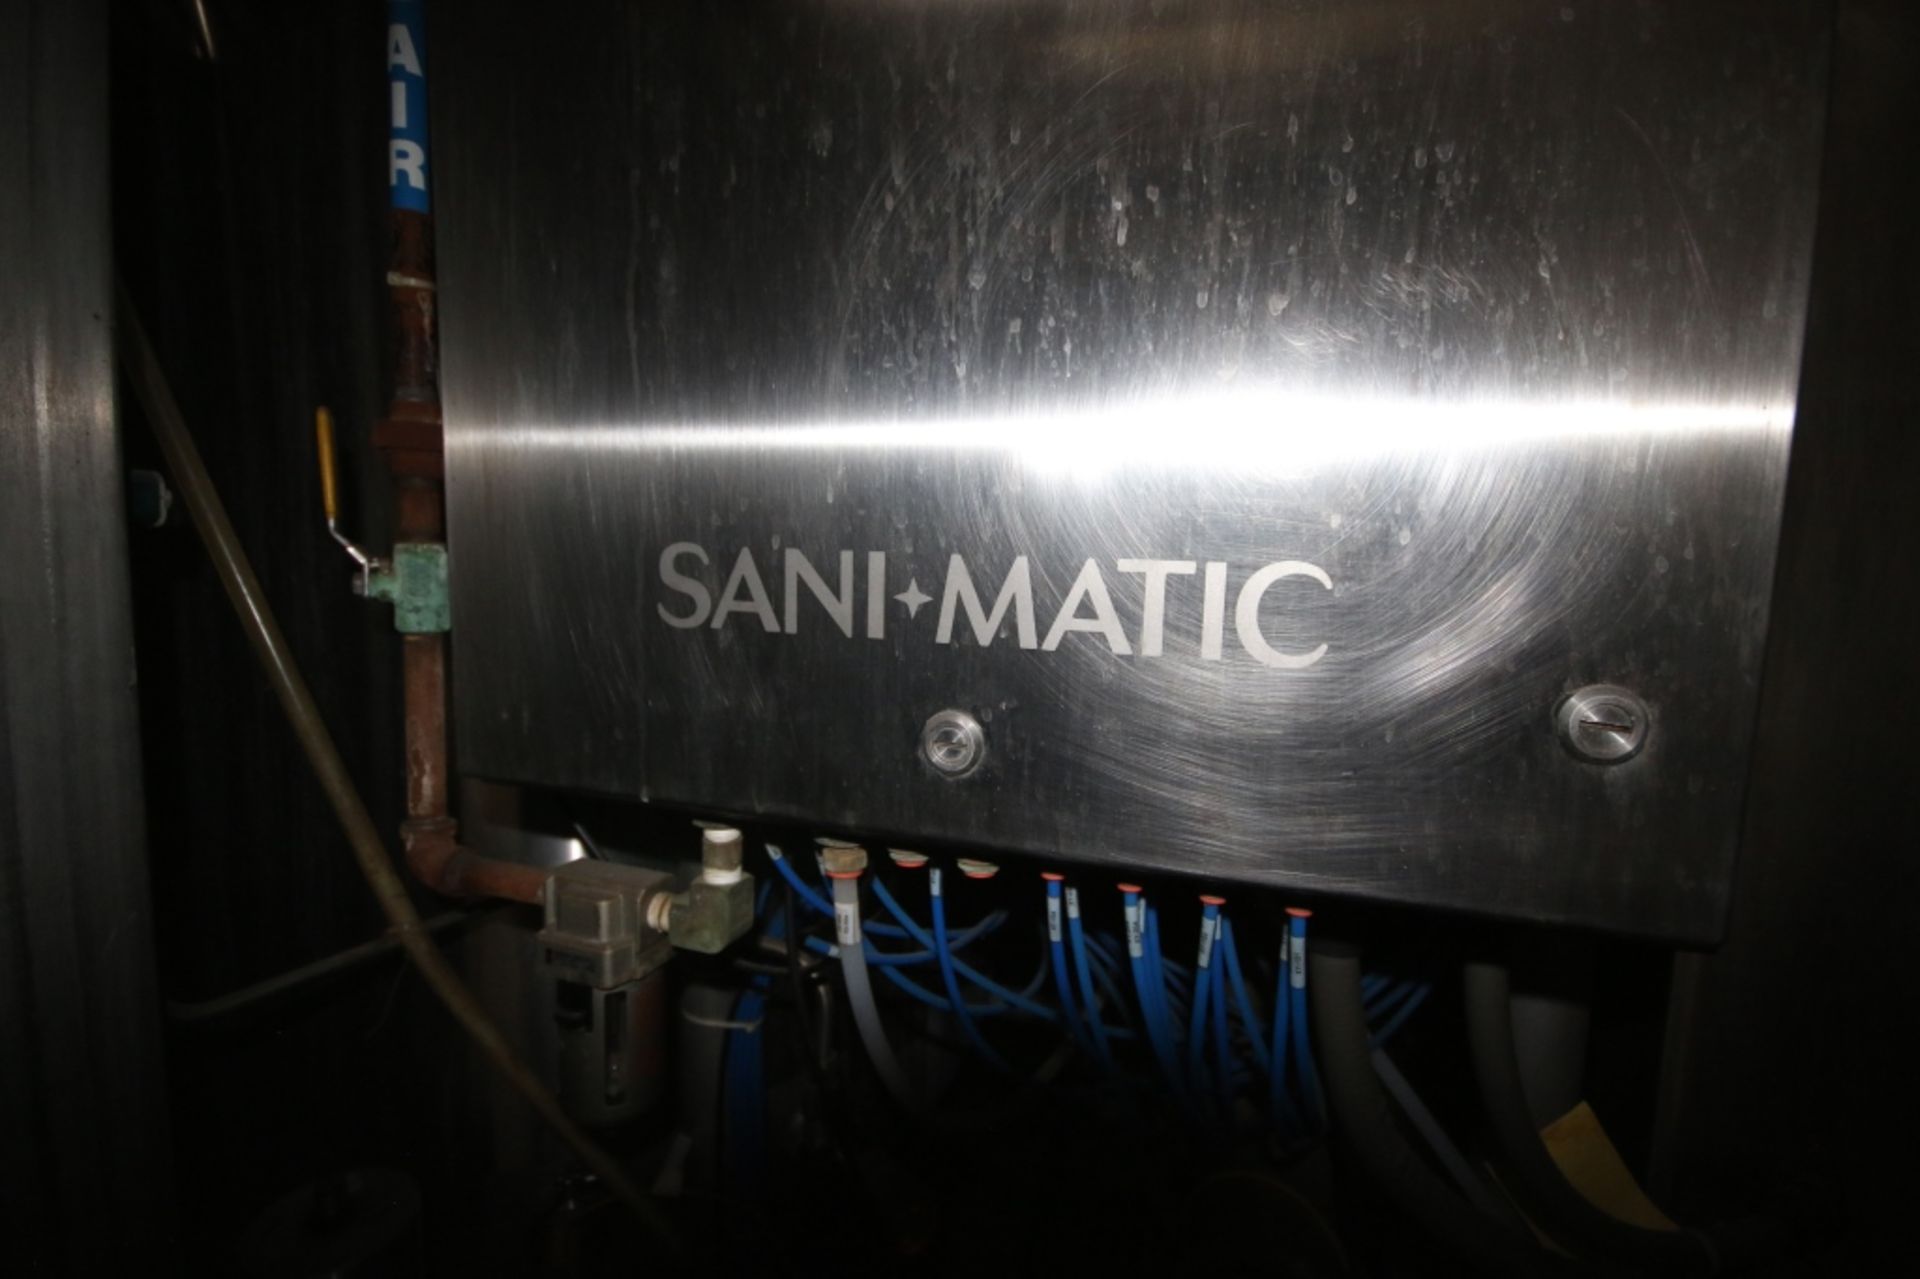 SANI-MATIC 3-Tank CIP System,with Fristam Centrifugal Pump, Associated Valves & Piping, with Control - Image 8 of 15